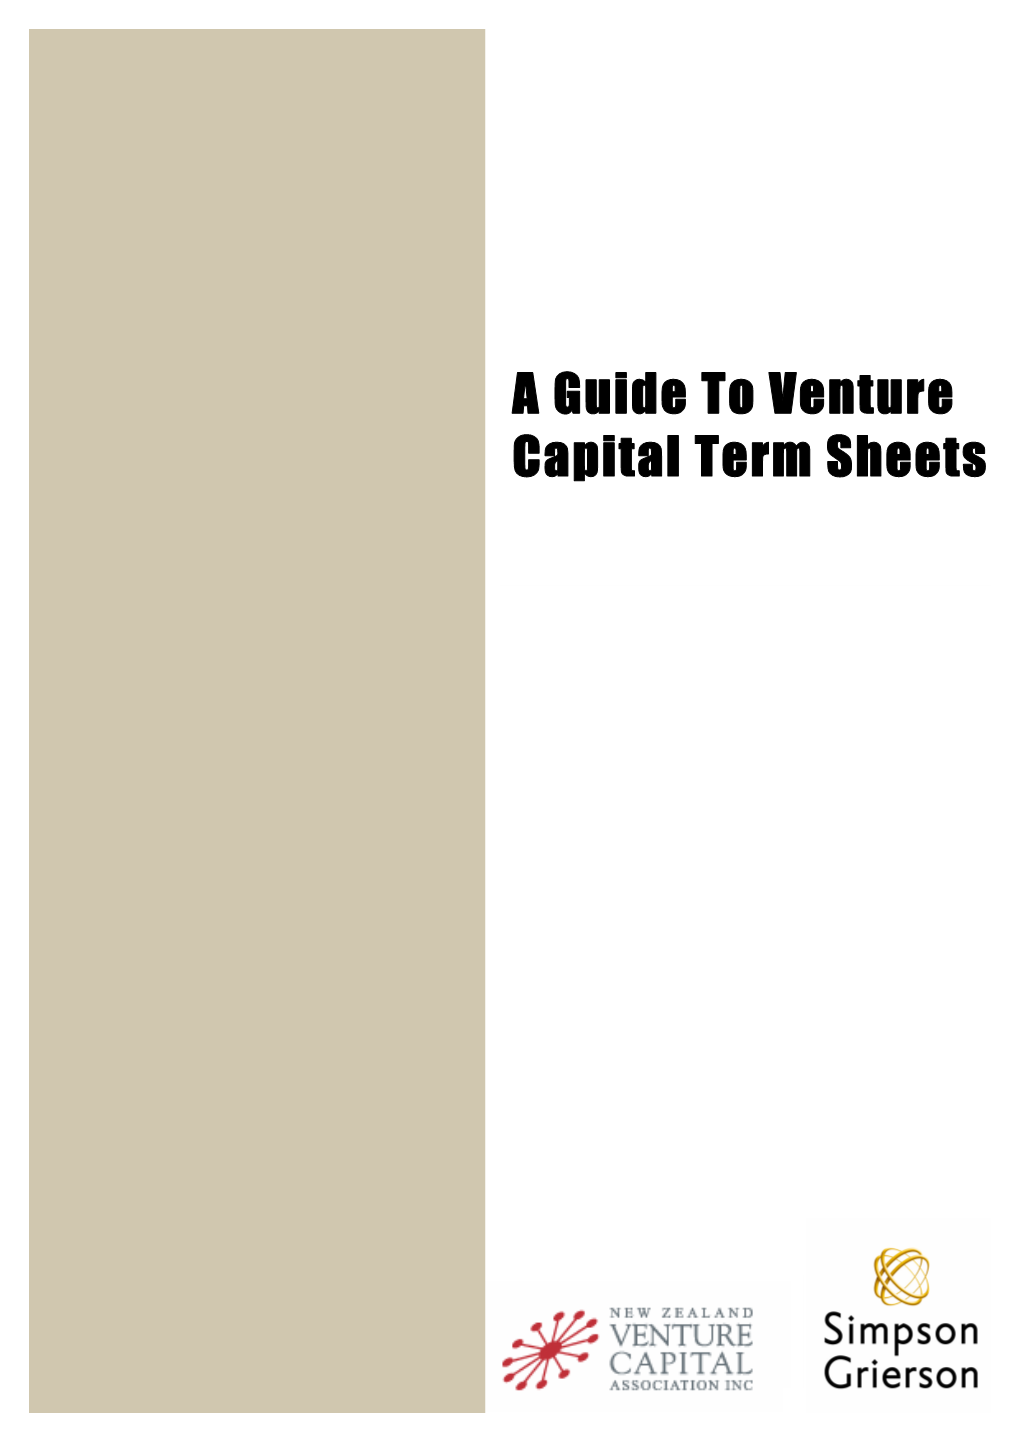 A Guide to Venture Capital Term Sheets Index